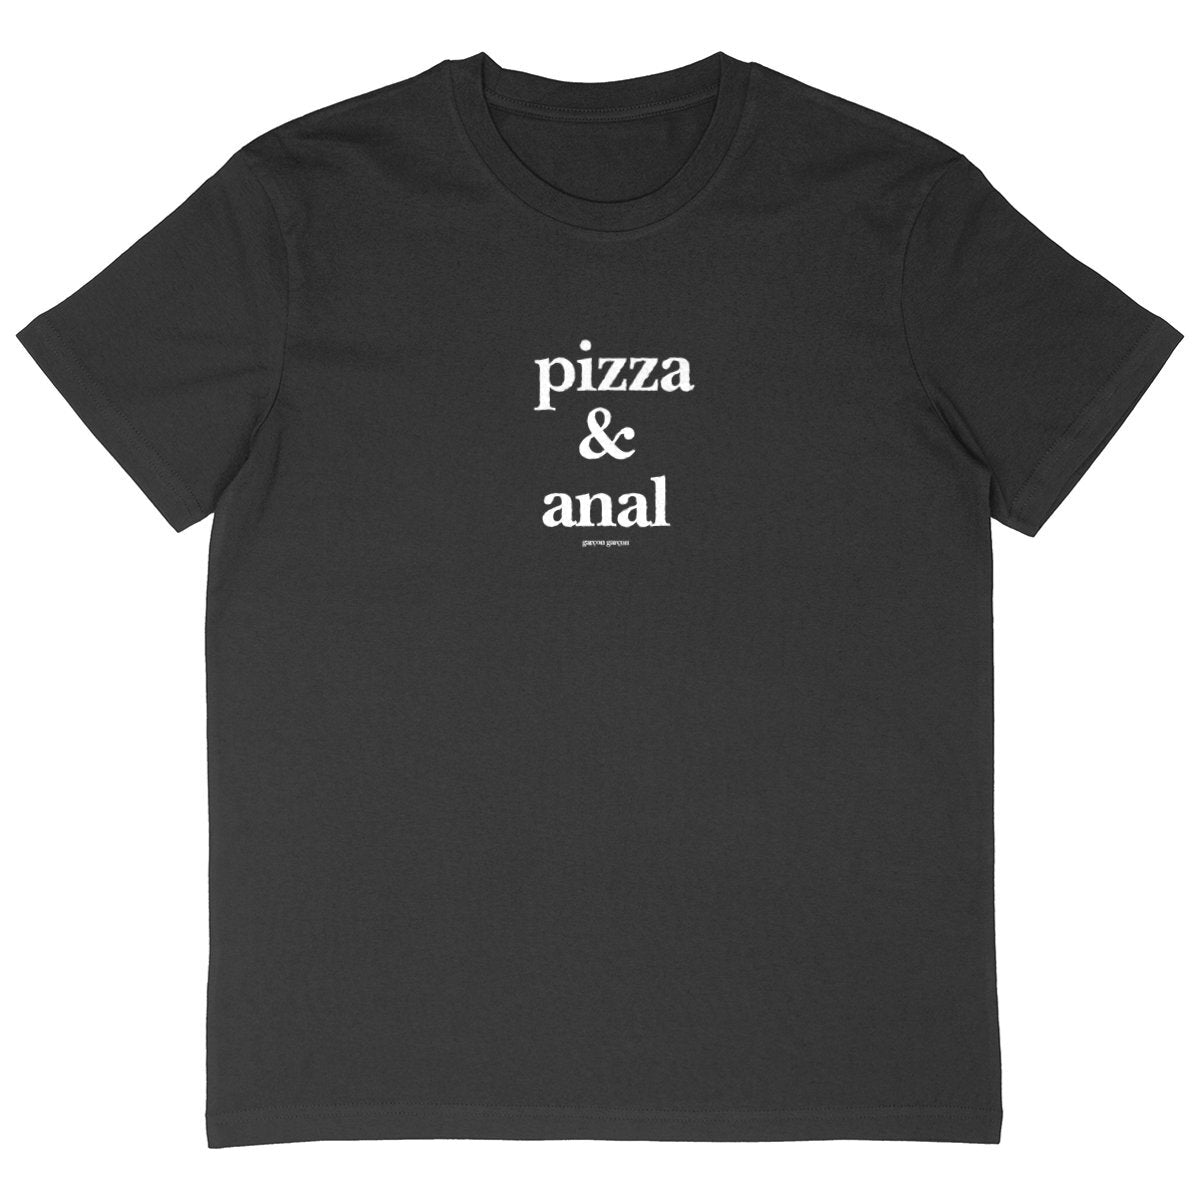 pizza and anal BLACK OVERSIZED TEE; BLACK tee oversized.garçon garçon tee oversize BLACK. Dive into the essence of Parisian cool with this oversized tee. The subtle 'garçon garçon' signature whispers a chic narrative, offering a slice of the city's famed elegance. Perfect for those who speak style with simplicity.